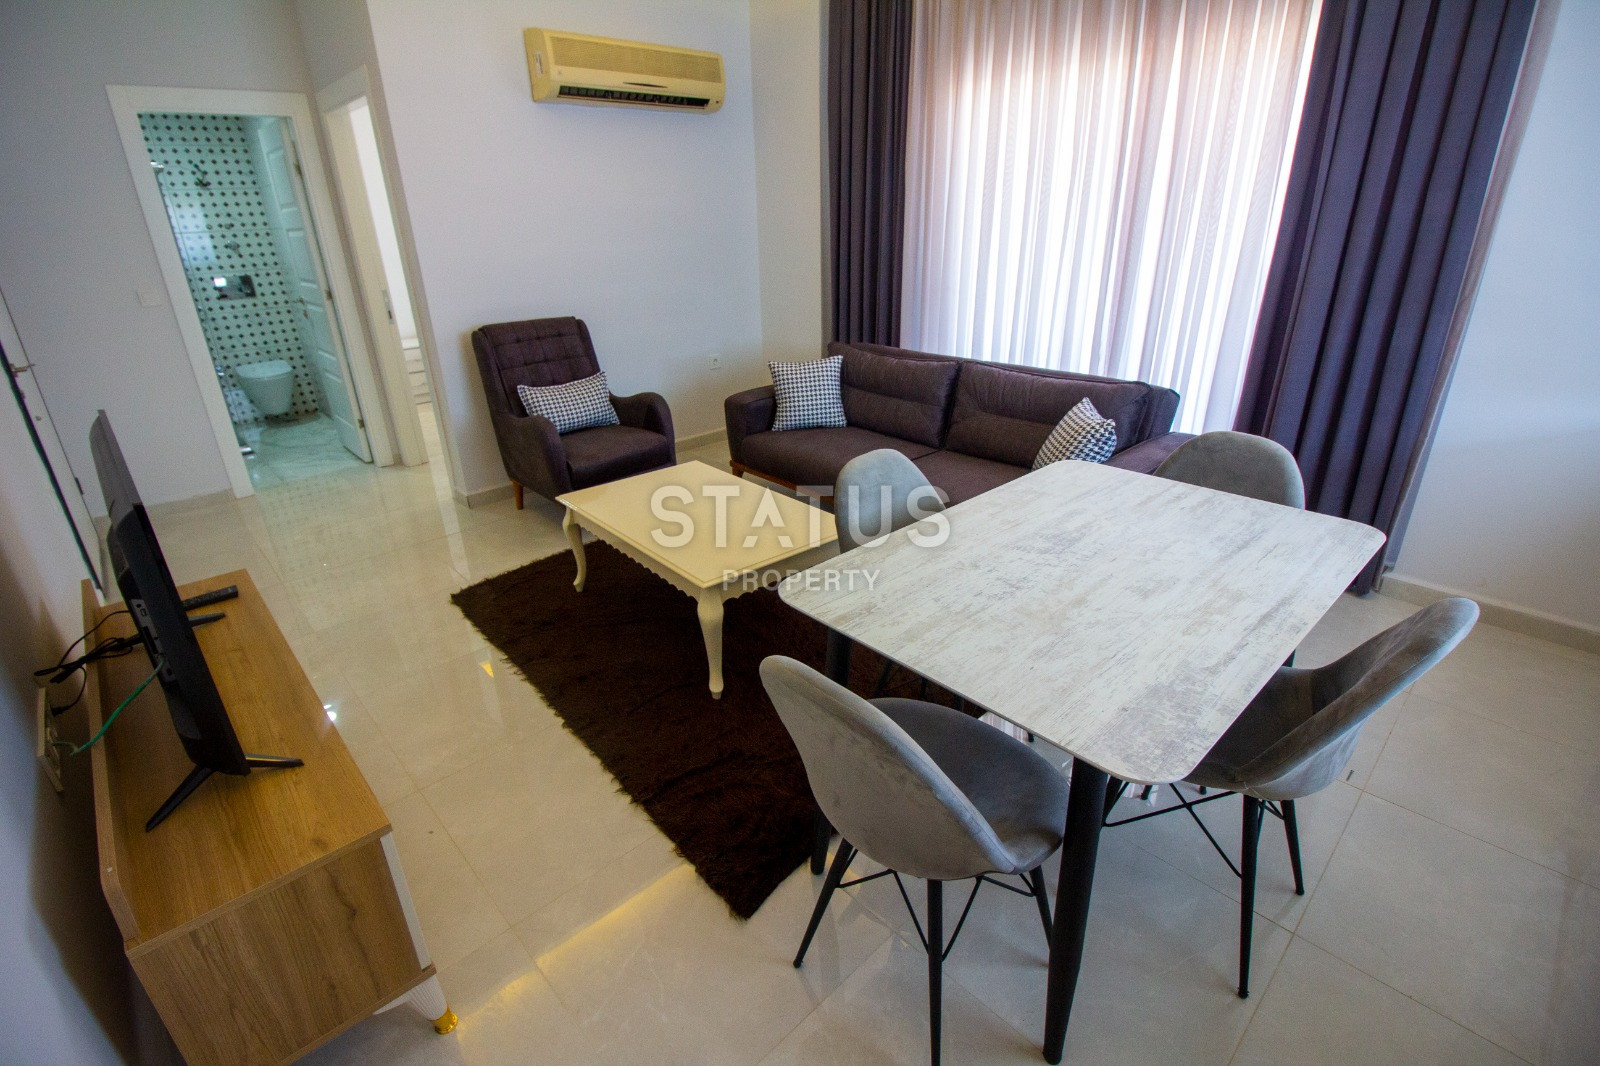 For sale is a 1+1 layout apartment in a new building in the Oba area, 47 m2. фото 2